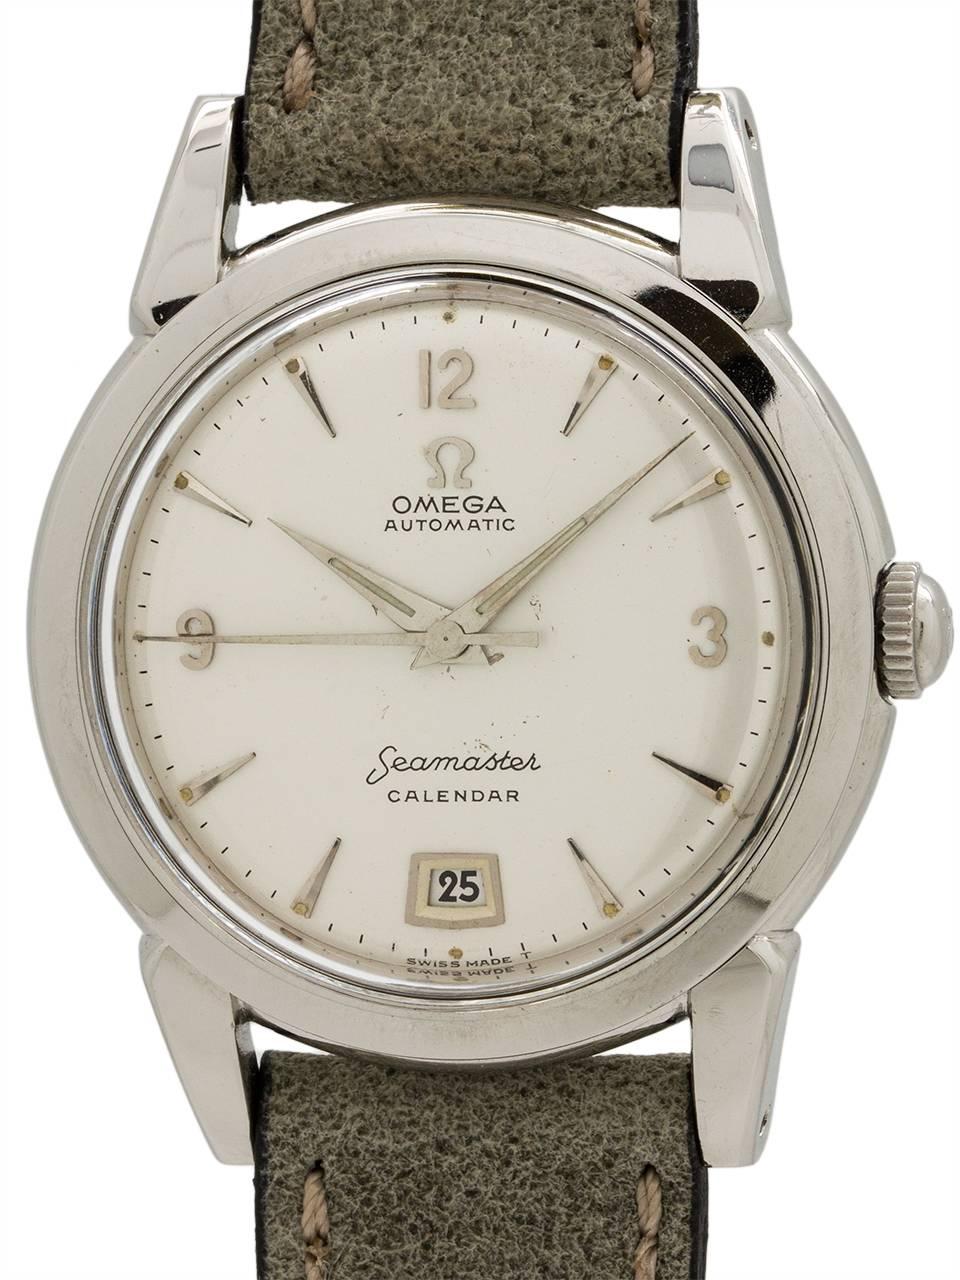 
Vintage man’s Omega Seamaster Calendar model ref 2757-1 circa 1952. Great looking vintage model with 34 x 42mm stainless steel case with smooth wide bezel, heavy sloped lugs, screwback case, and acrylic crystal. Powered by the bumper automatic